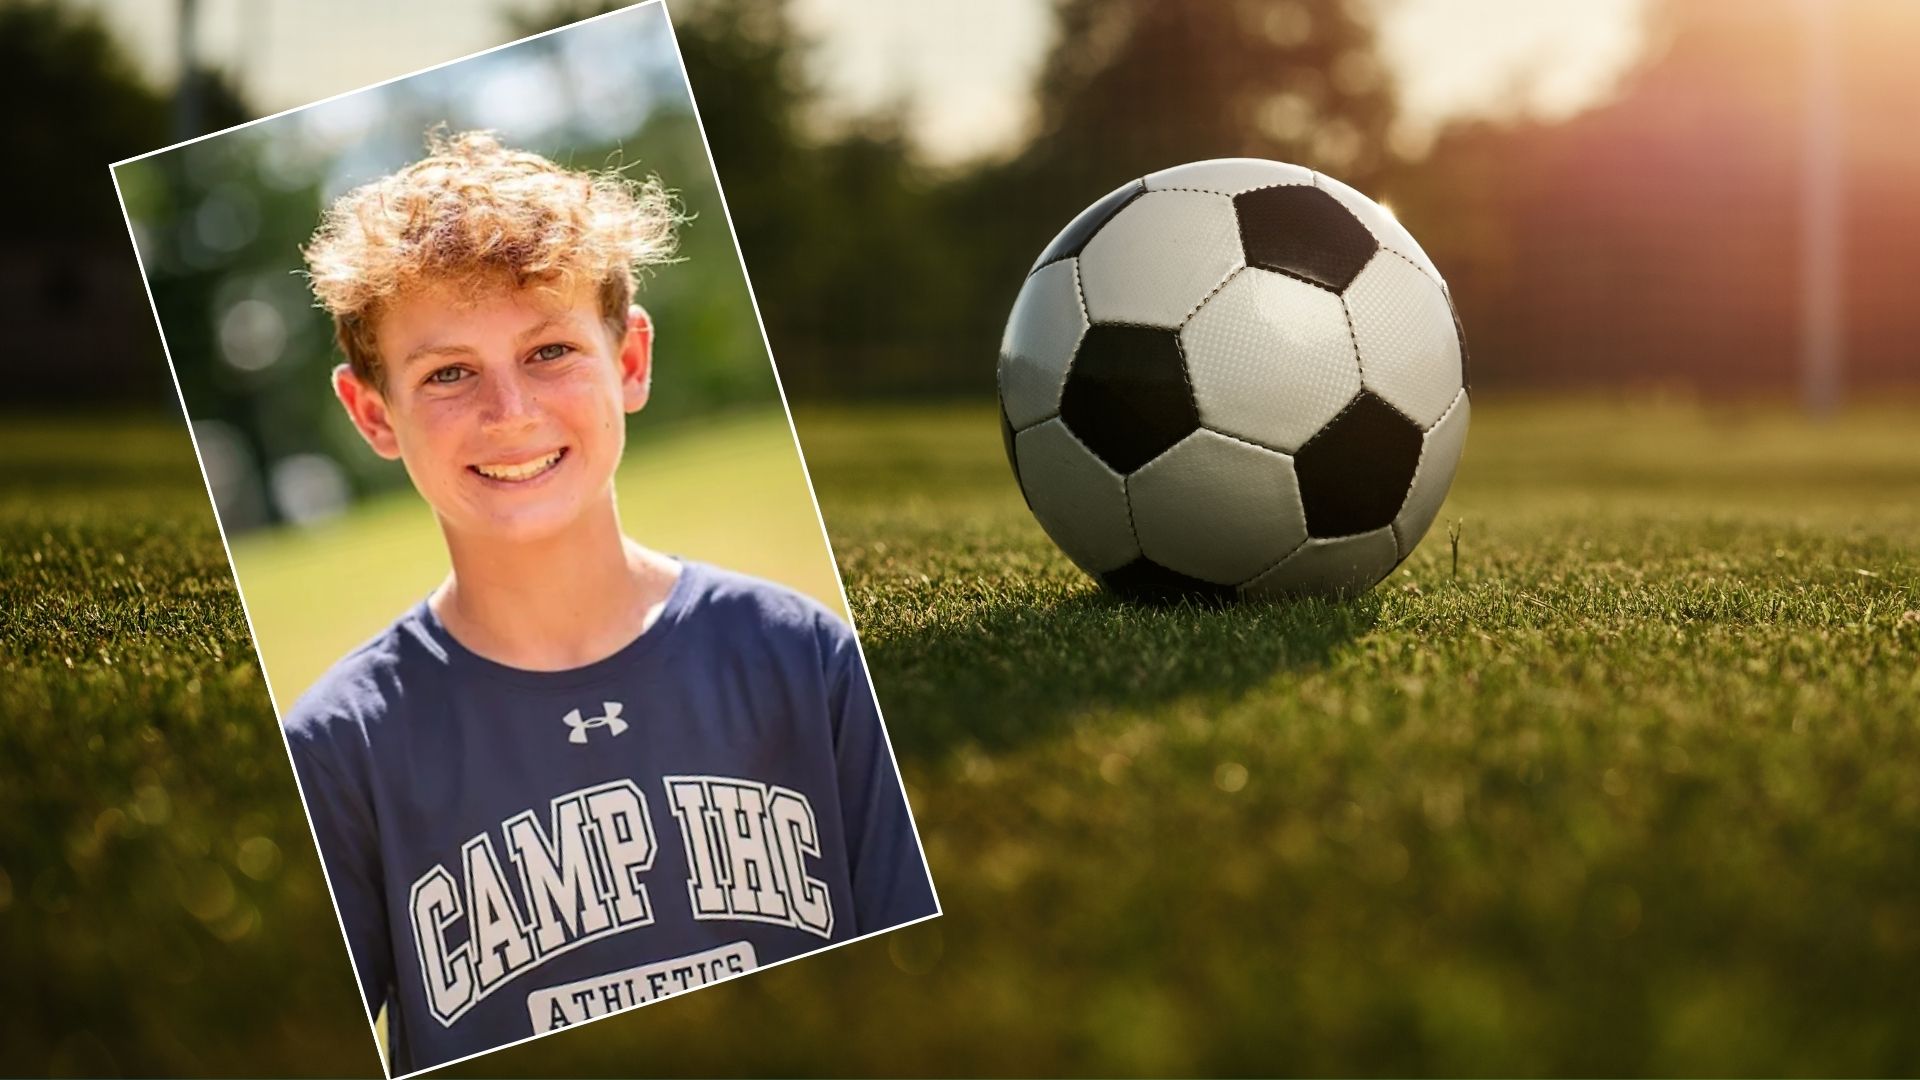 A photo of a child to the left in the foreground. In the background, a photo of a soccer ball on a grassy field.